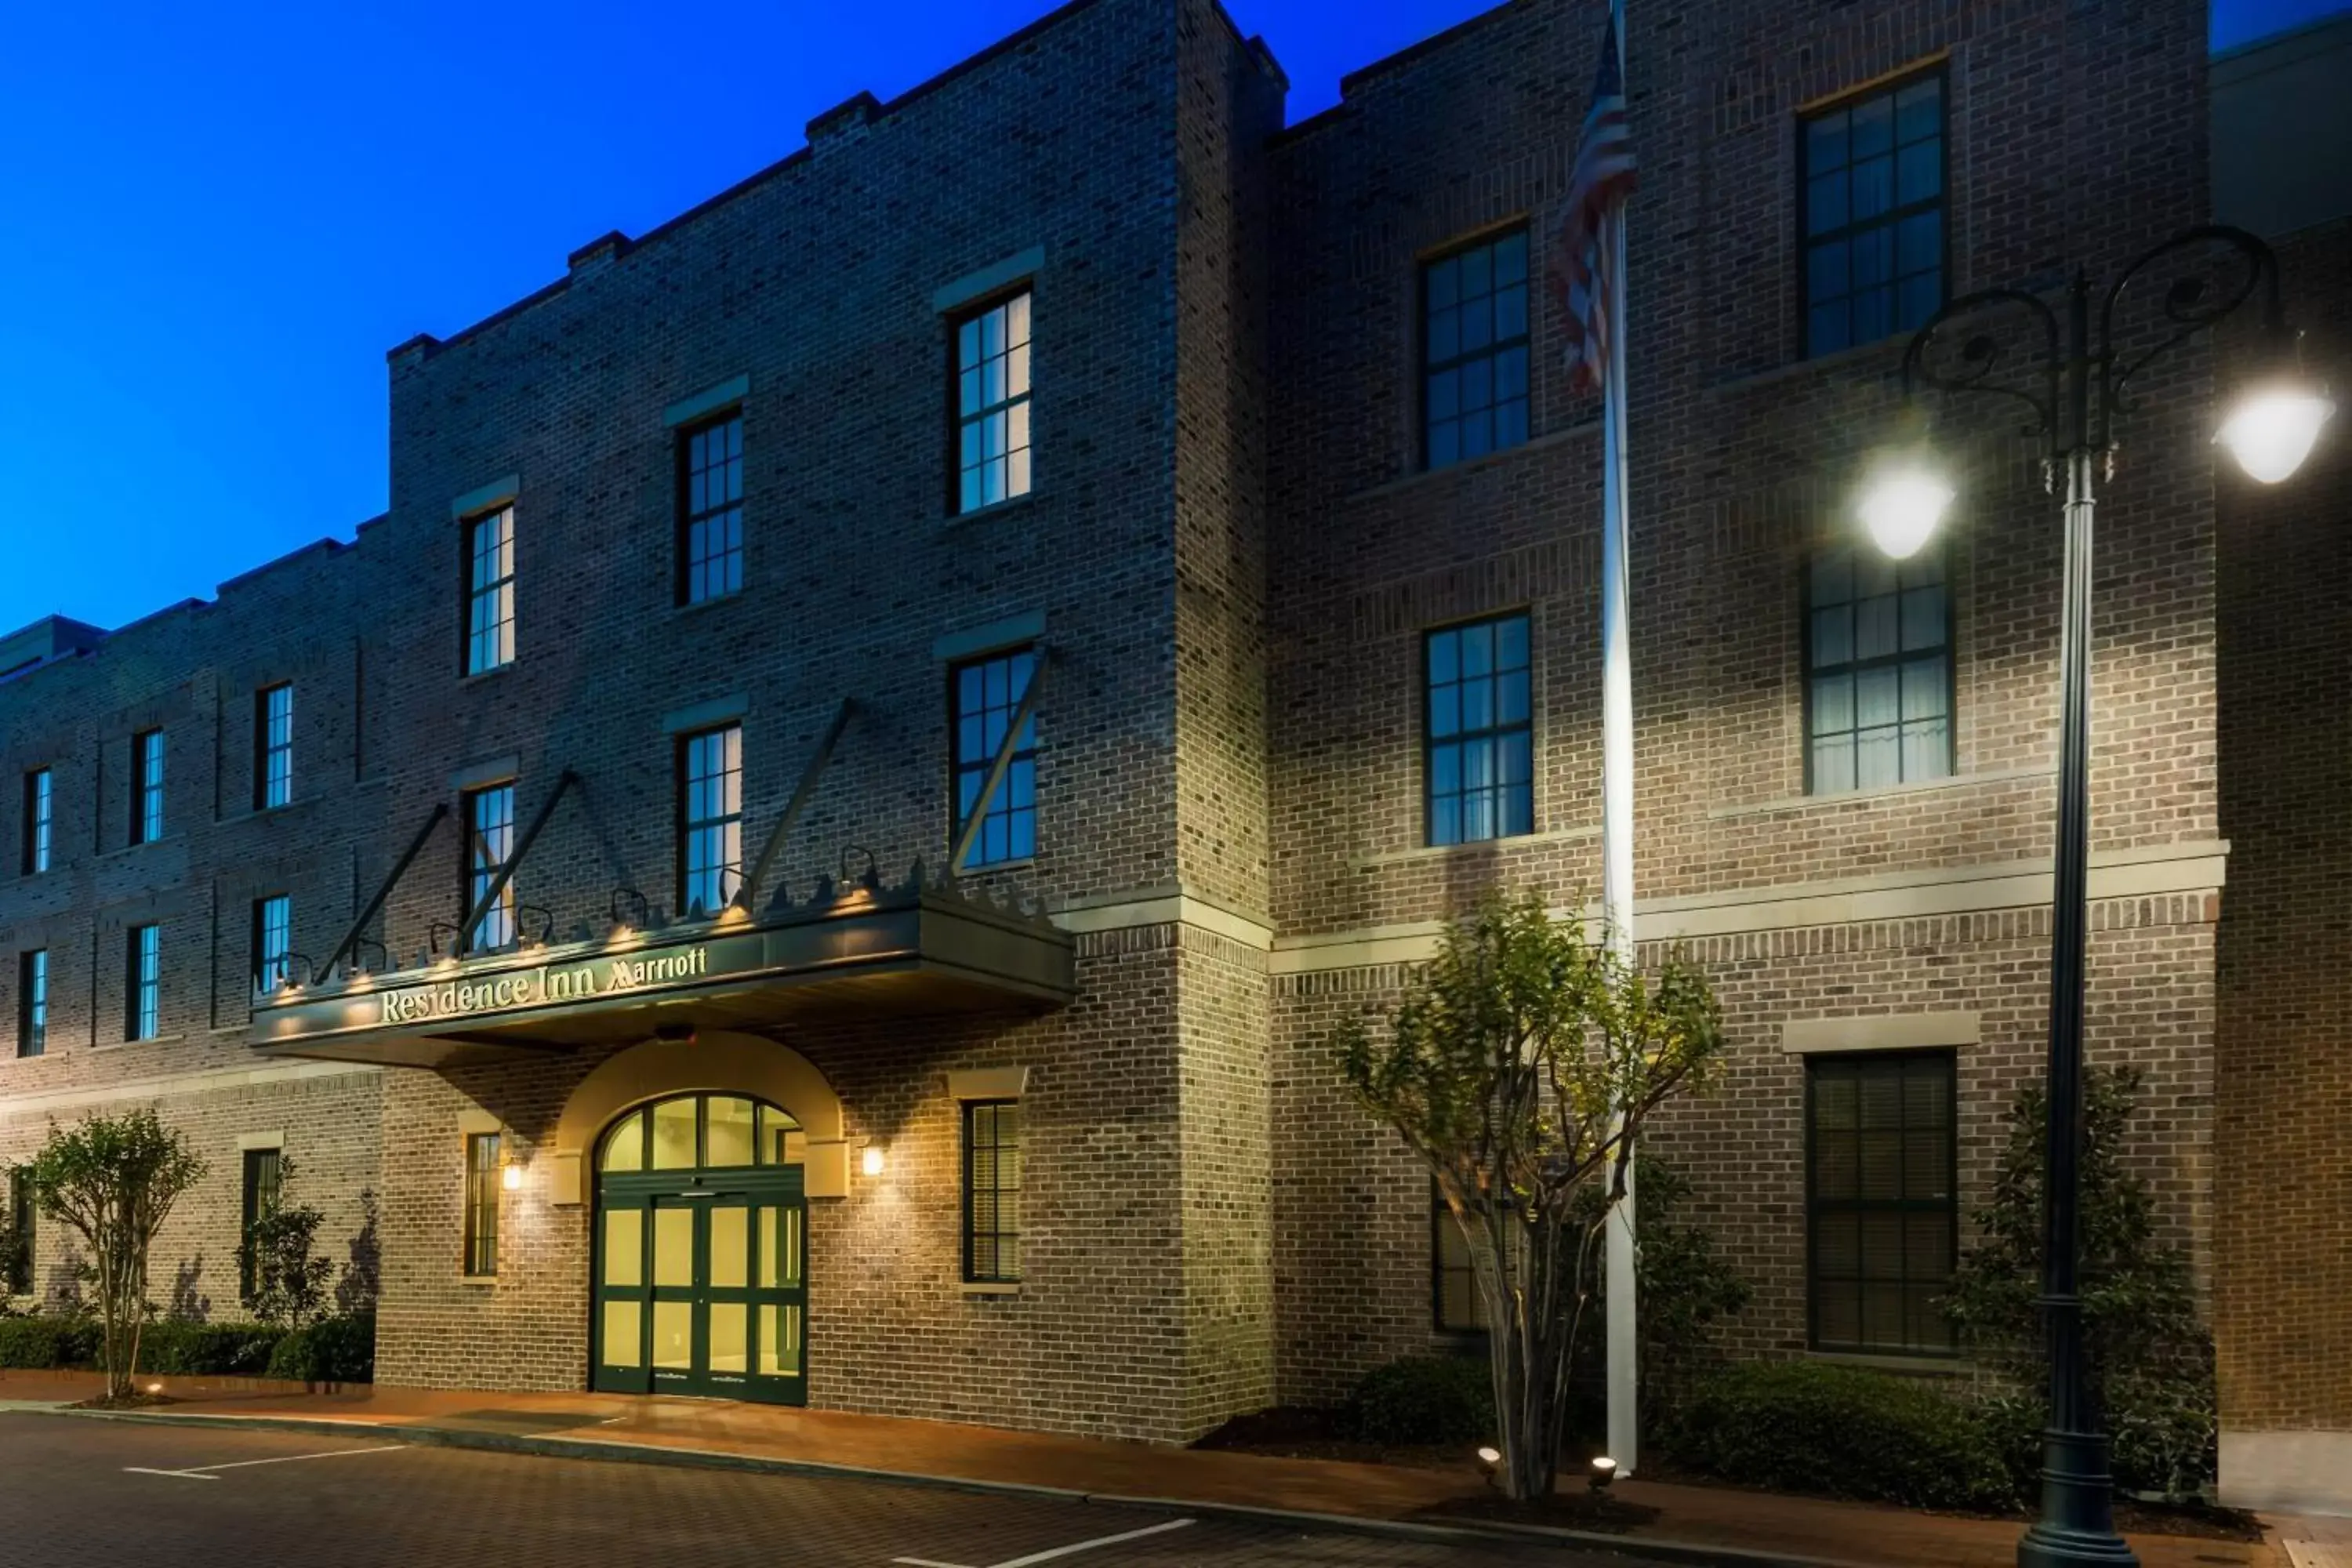 Property Building in Residence Inn Savannah Downtown Historic District